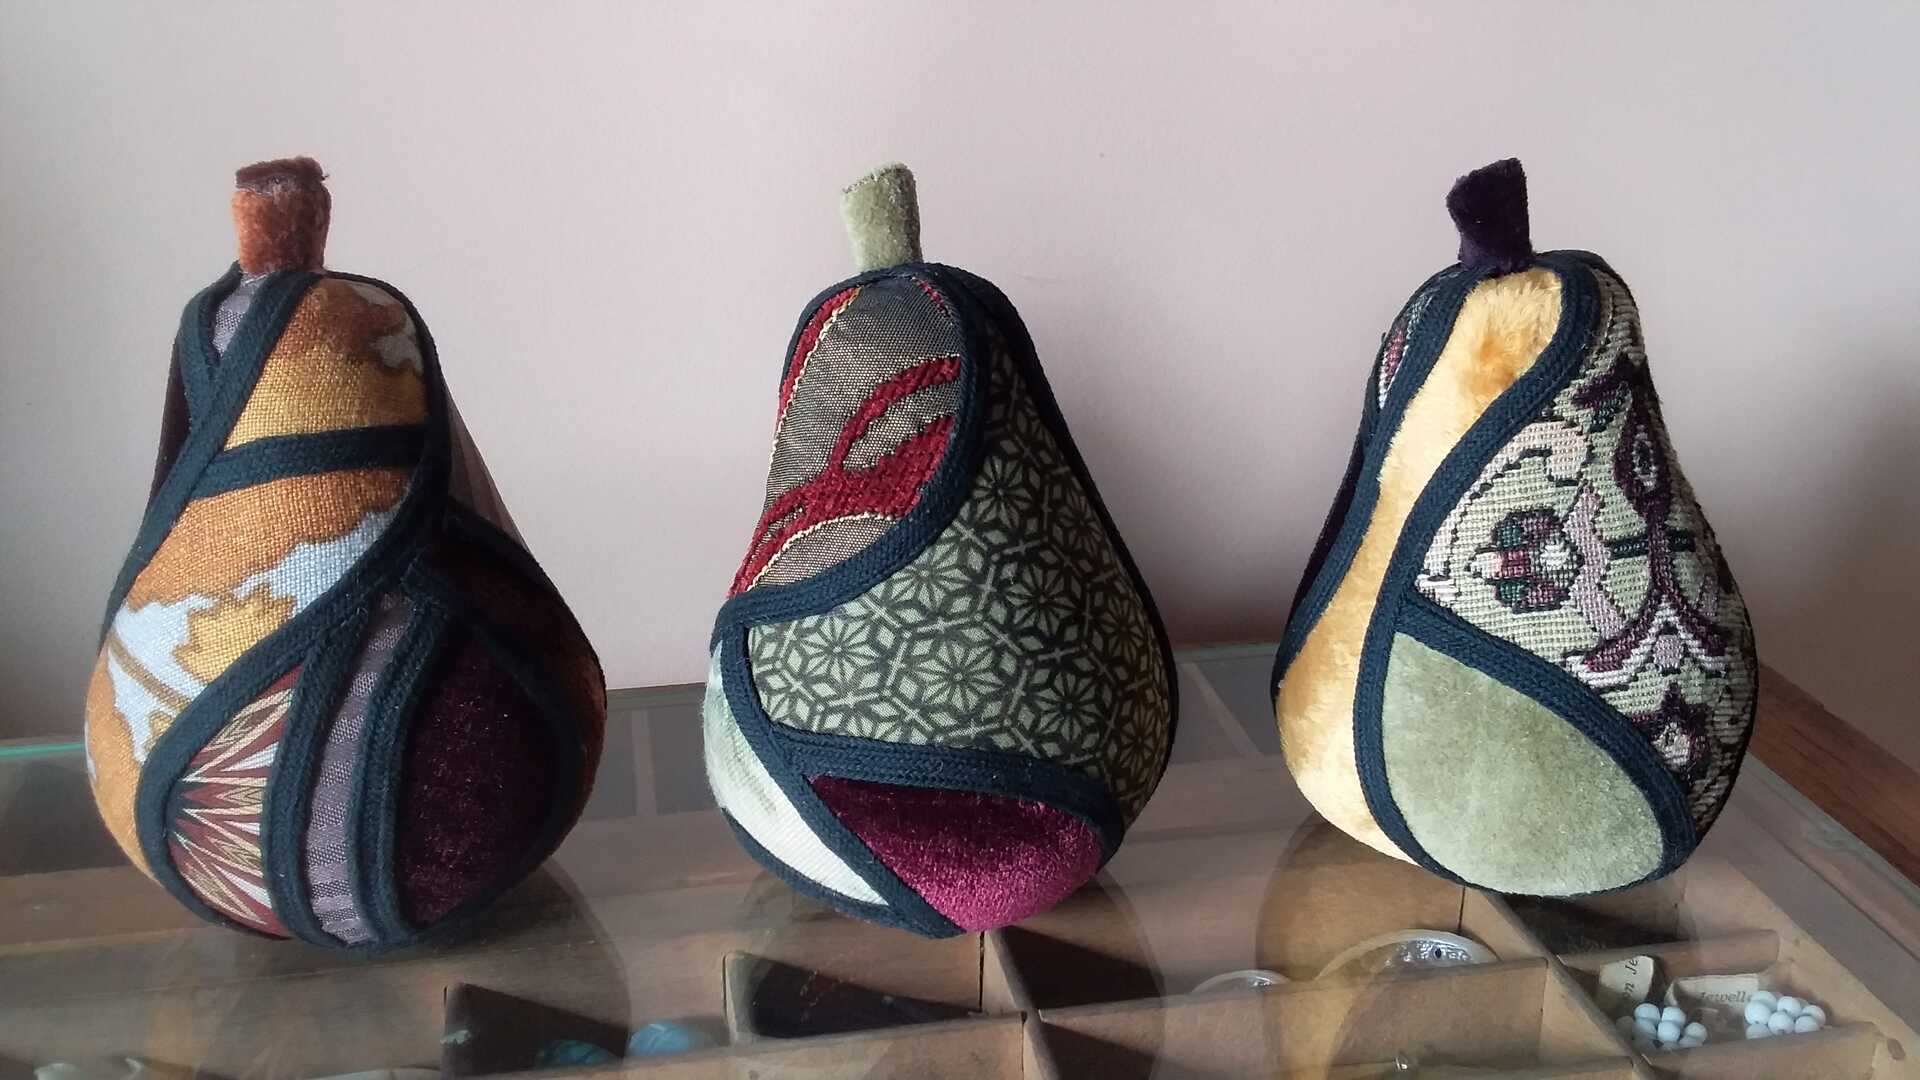 Sculpture 'Enough for Everyone II' by Libby Bloxham. Three pears are covered in swatches of fabric, in shades favouring olive green, orange and red. The fabric covering is segmented into irregular panels with thick black binding, complimenting the contours of the shape.